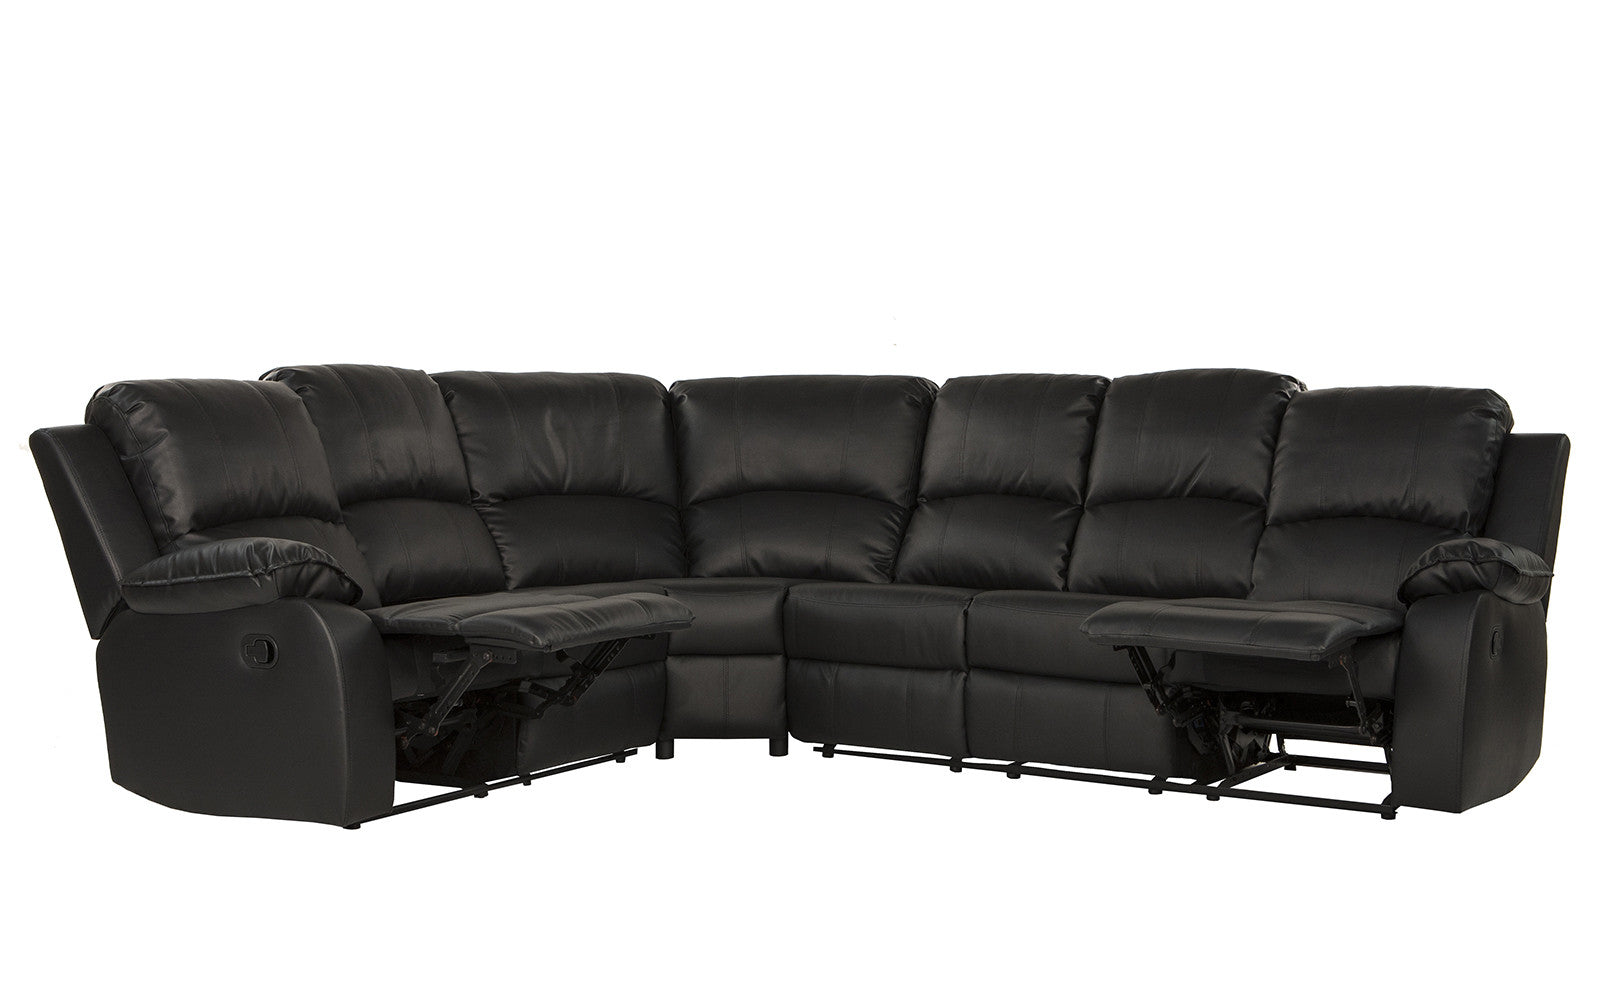 classic 6-seat leather reclining sectional sofa